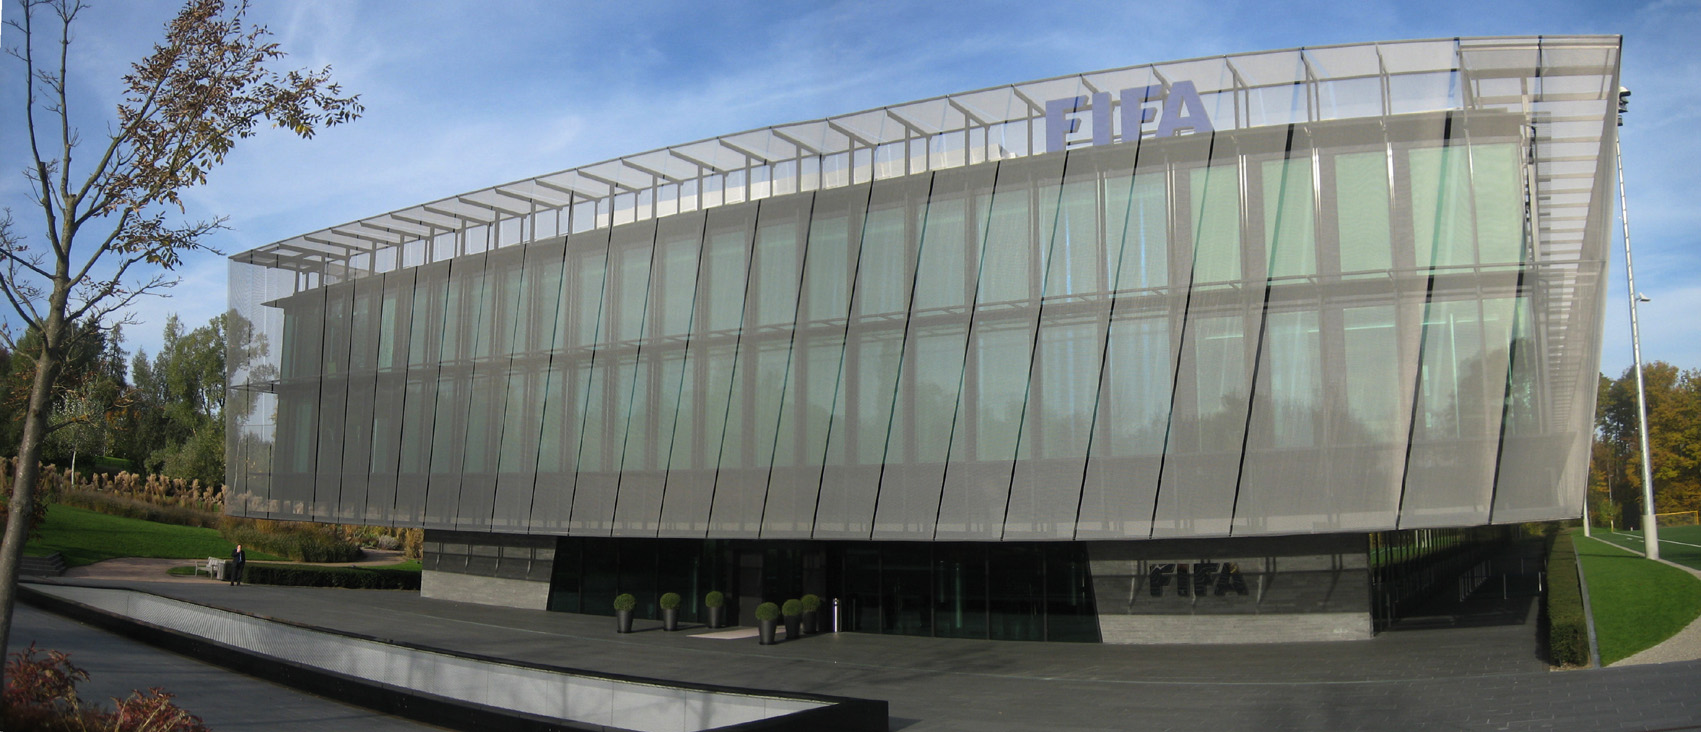 Headquarters of FIFA the world governing body of football